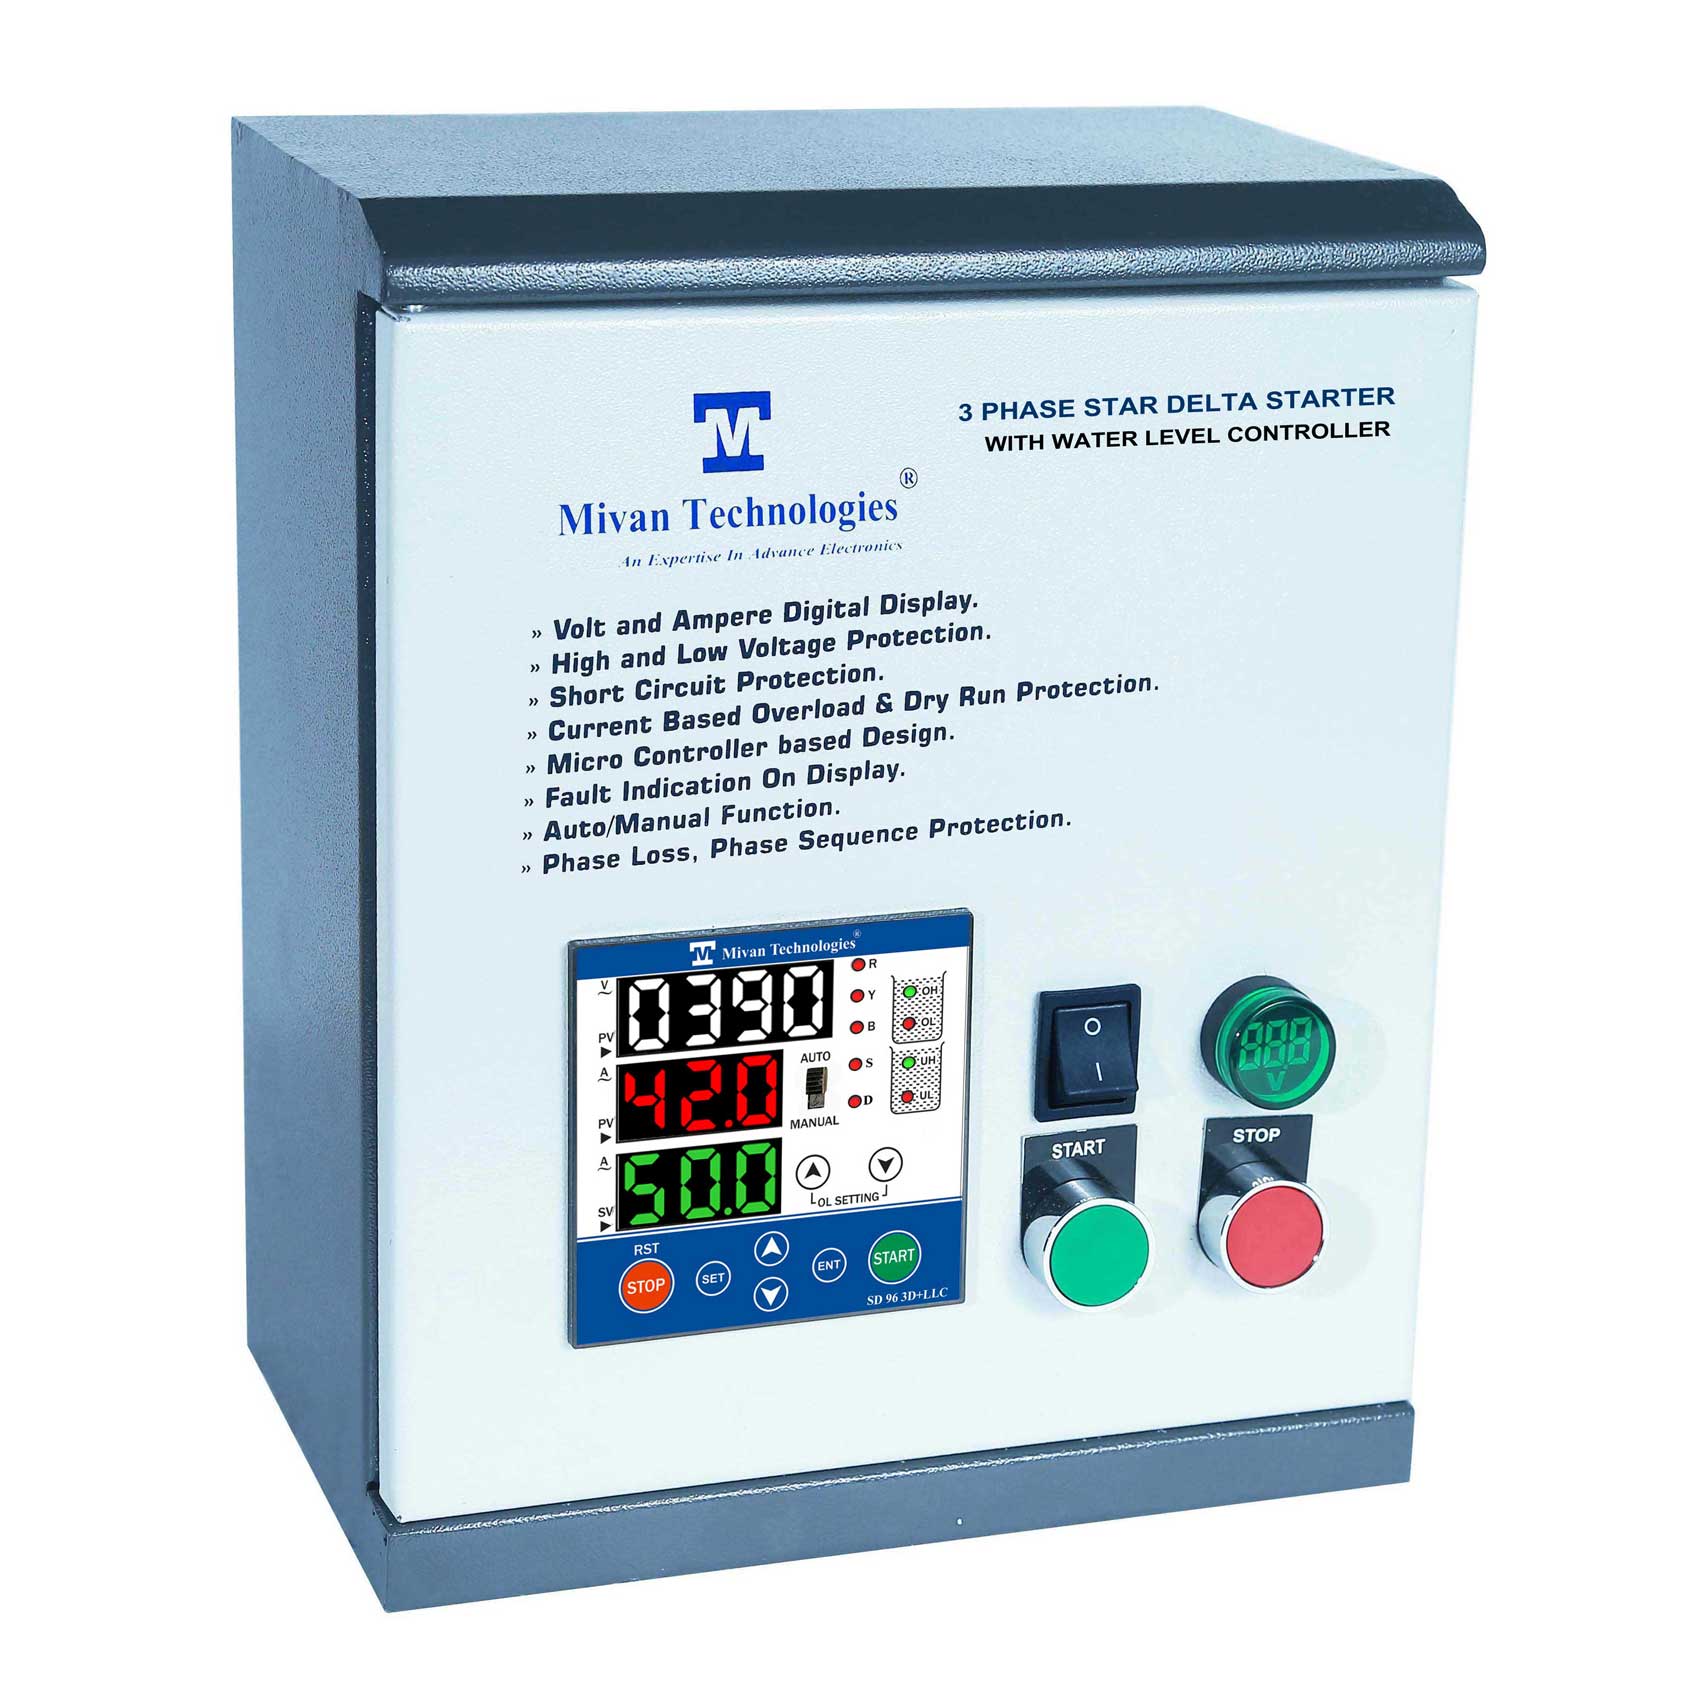 3 phase 3 display Heavy Duty water level controller with Star Delta motor starter with HV LV OL Dry protection with Auto switch spp and timer SD959580 for 50 HP motor